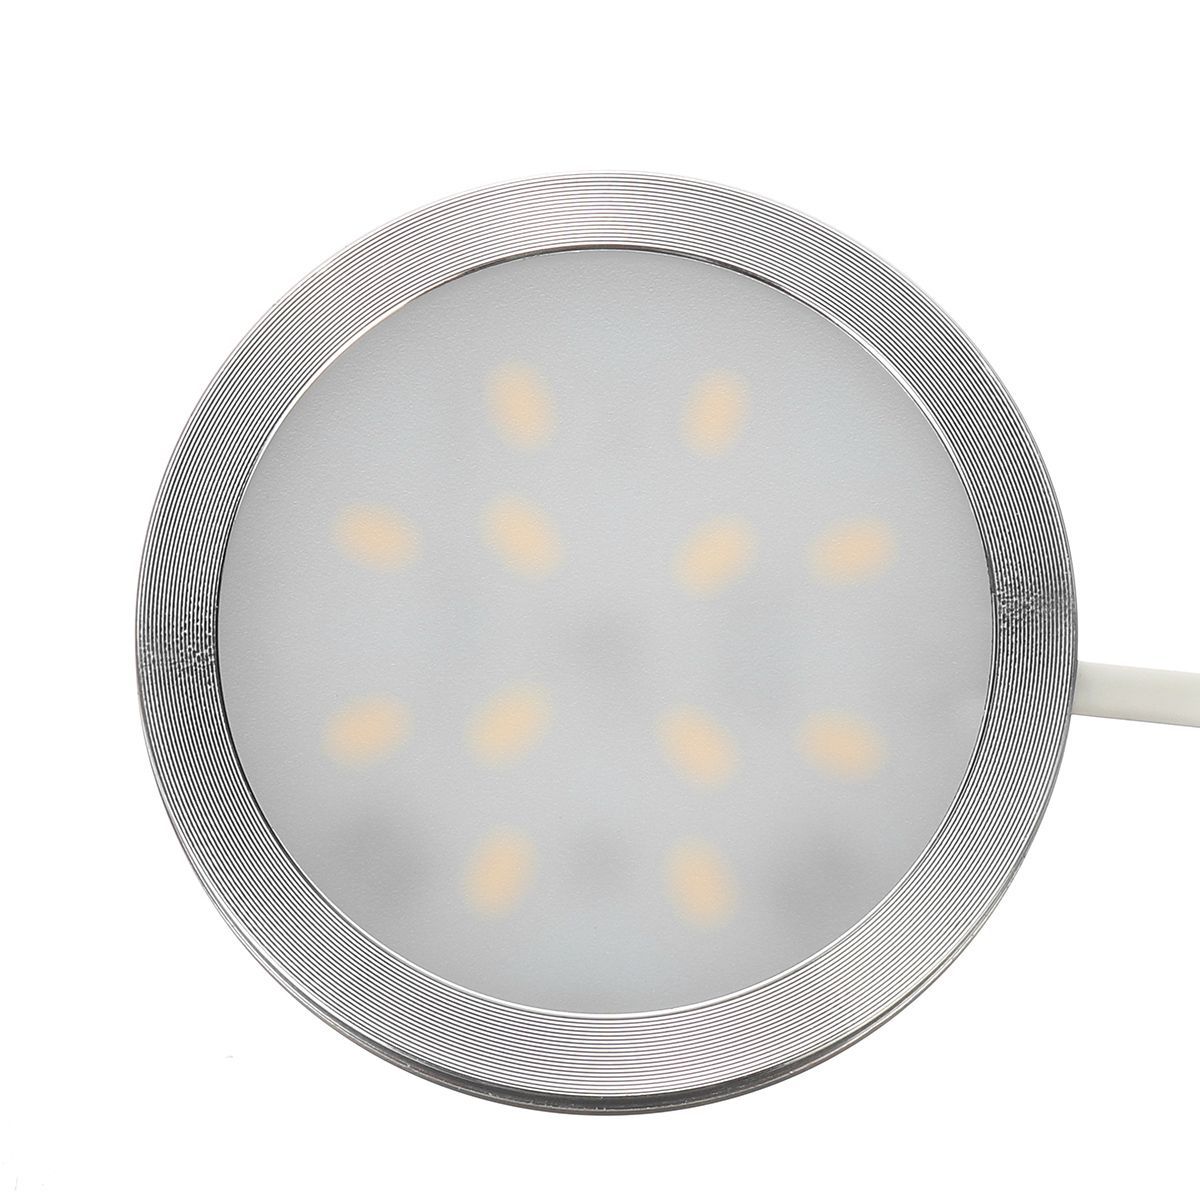 25W-6-In-1-LED-Under-Cabinet-Light-Ceiling-Panel-Down-Slim-Kitchen-Cupboard-Recessed-Lamp-DC12V-1705748